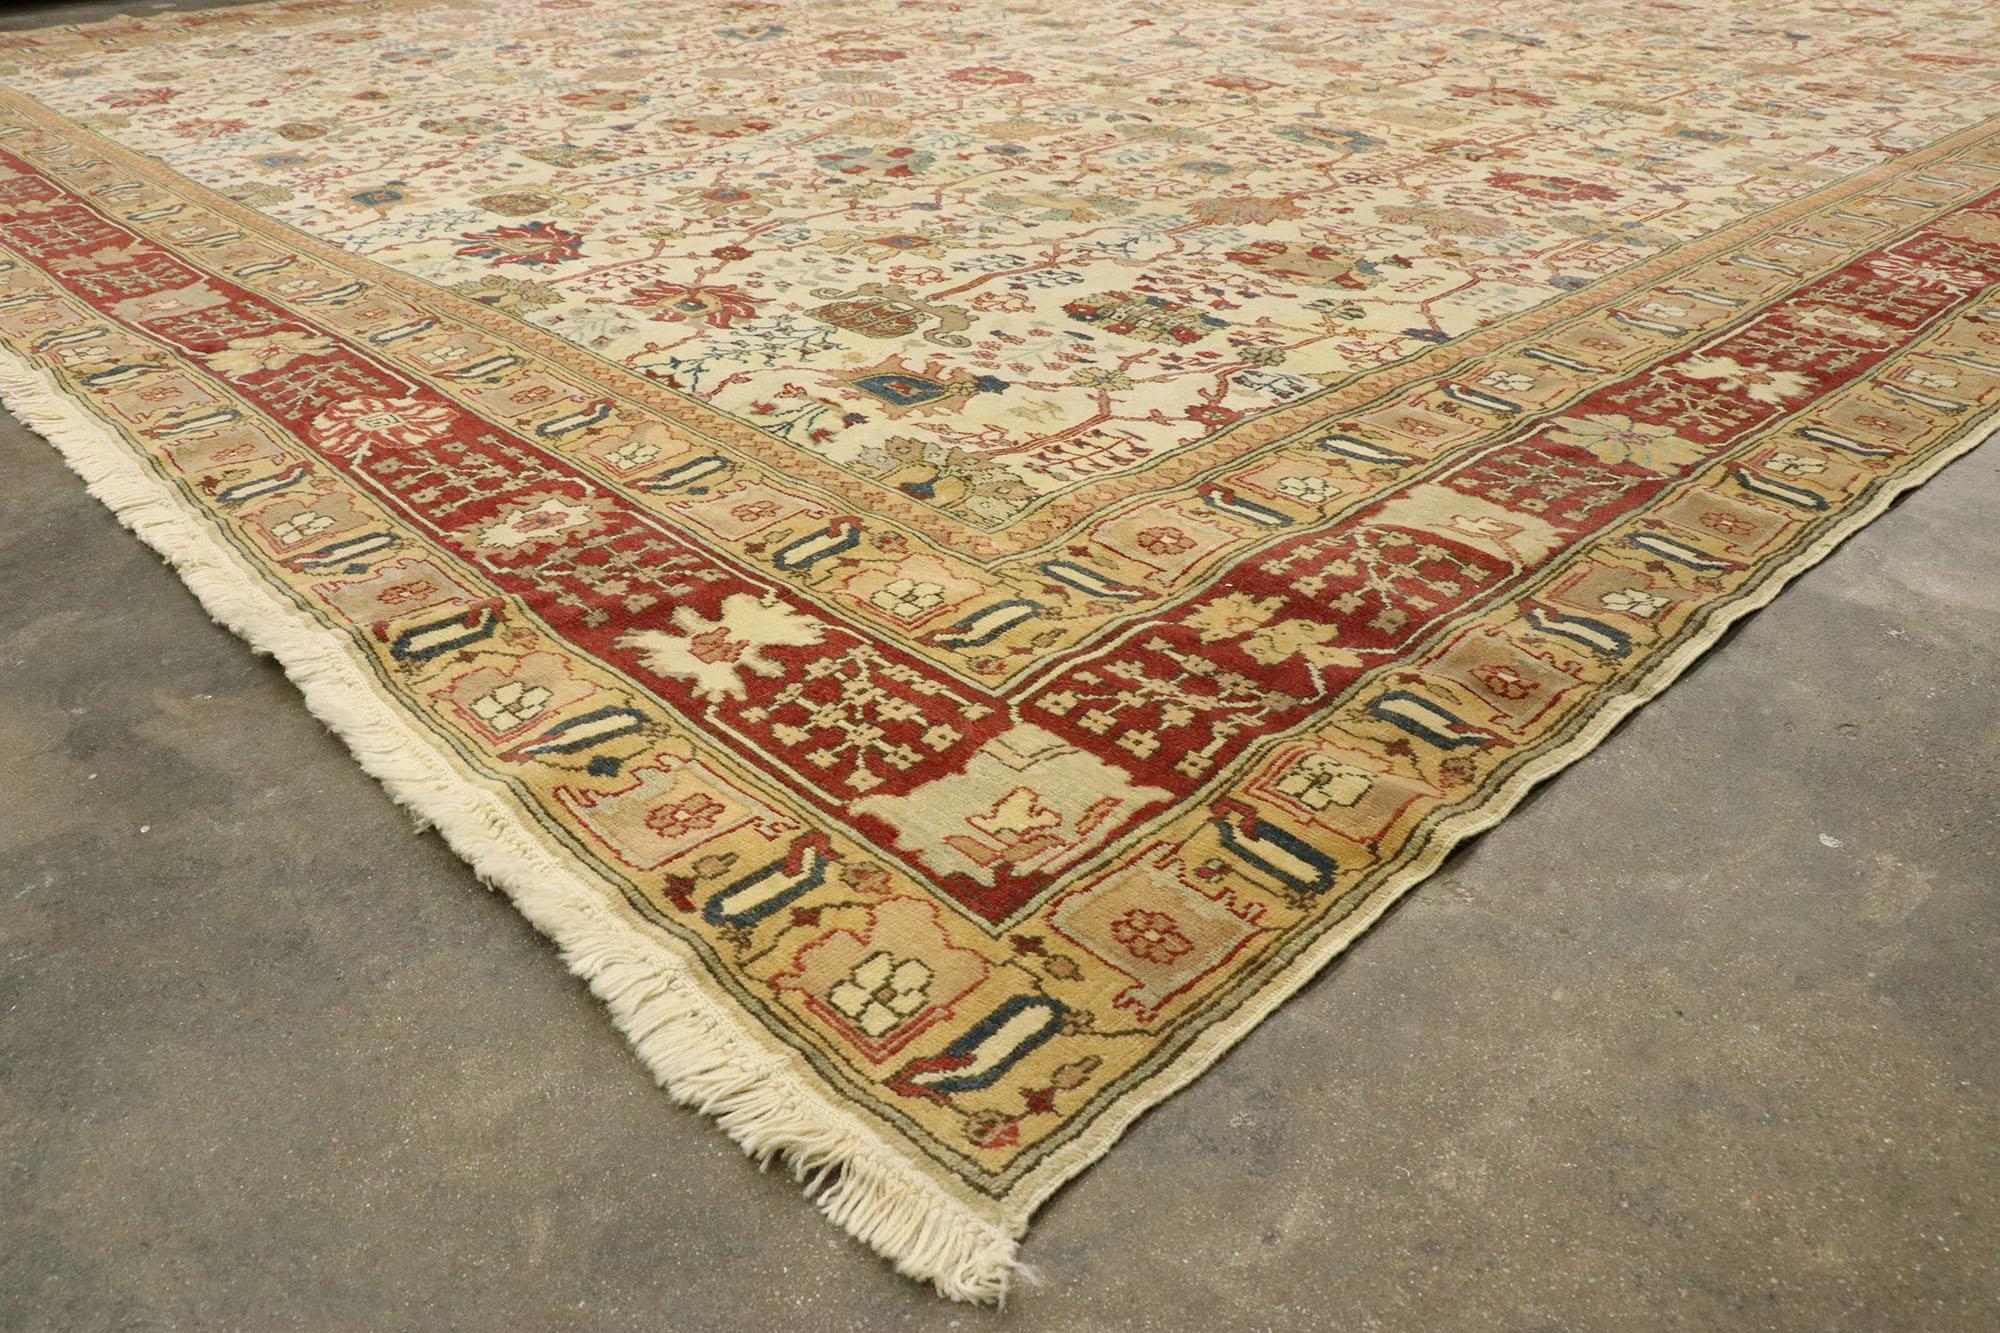 20th Century Vintage Turkish Rug with Arts & Crafts Style Inspired by William Morris